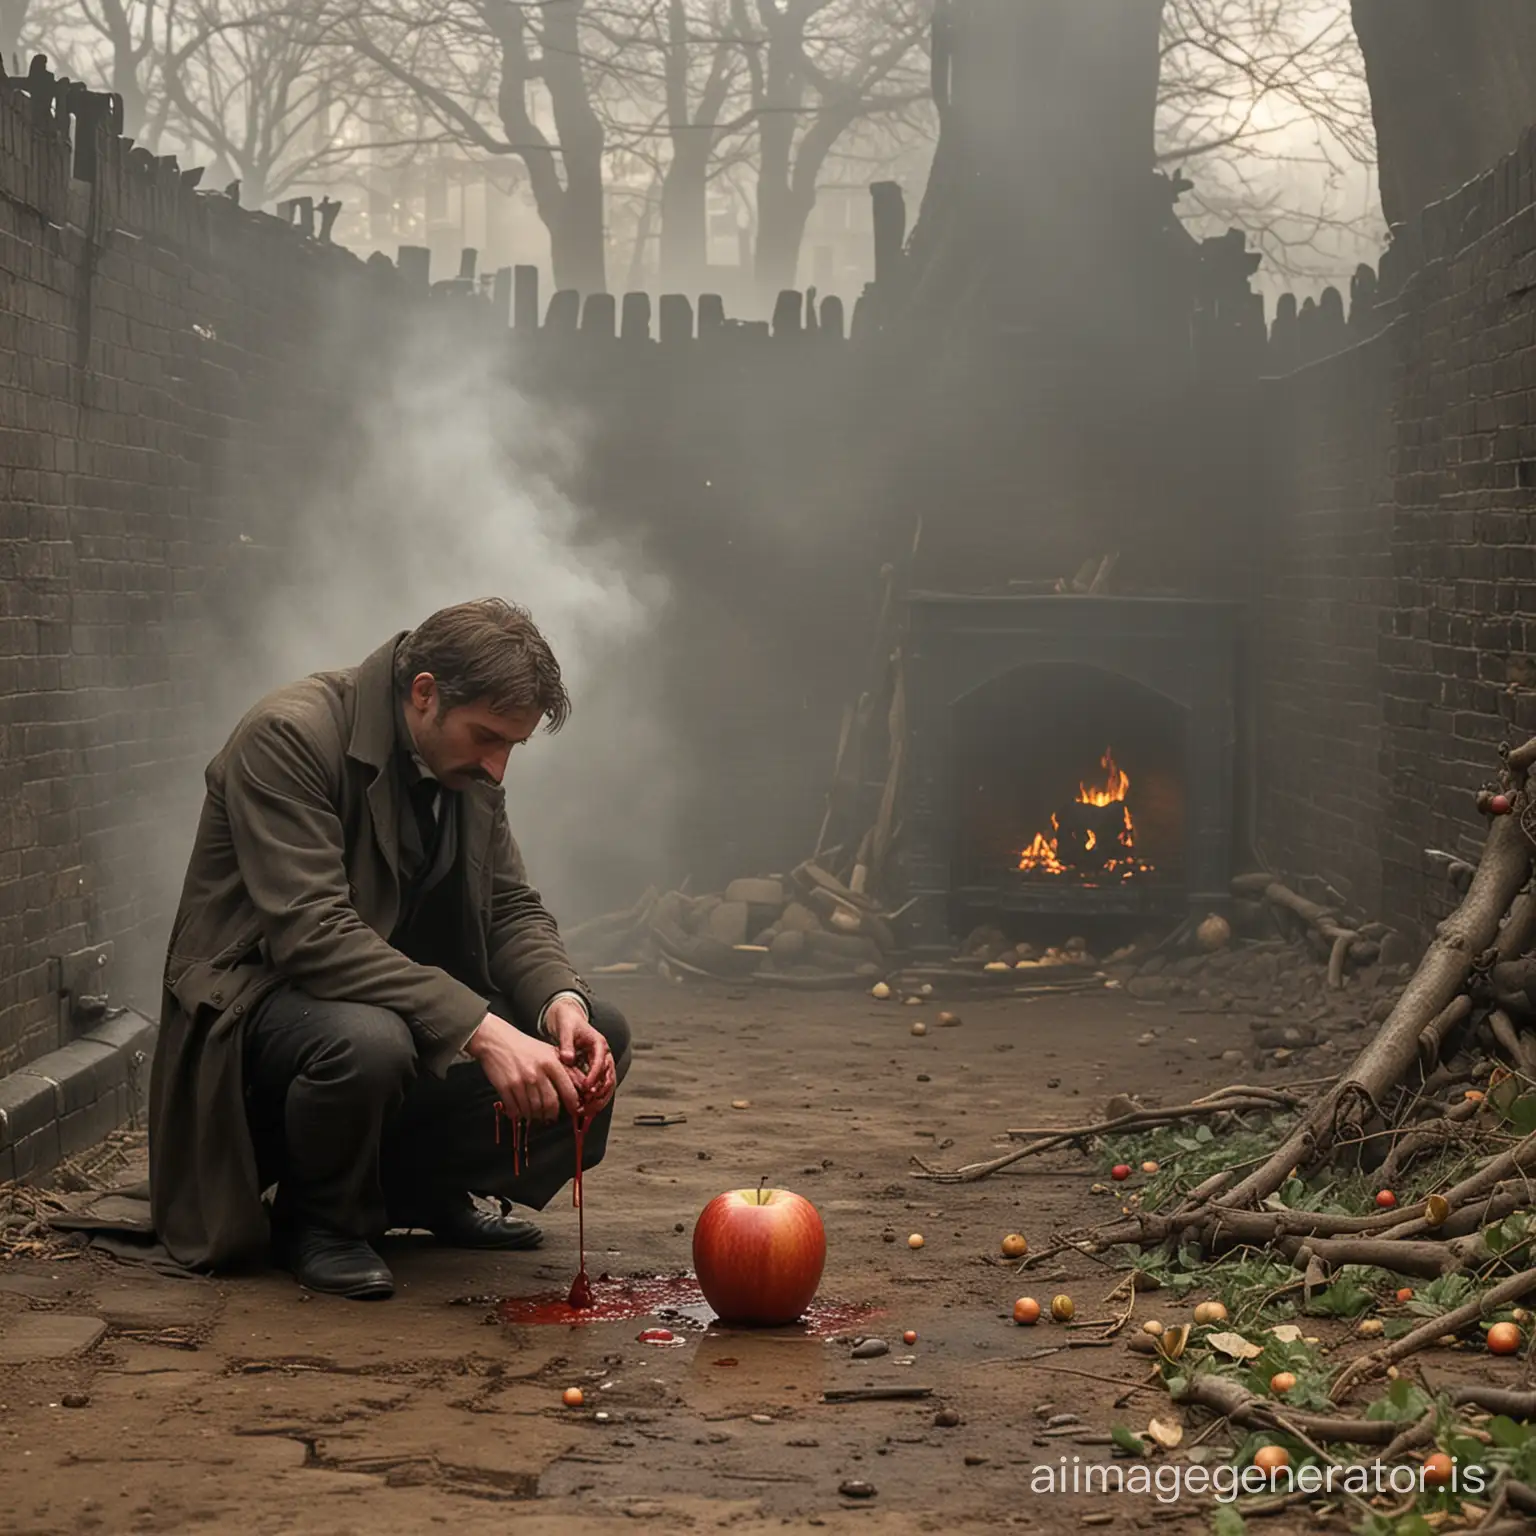 Foggy London, 1888. A poisonous apple split in 2 drips with blood on the ground. A man with a secret sits by his fireside in his longue. 